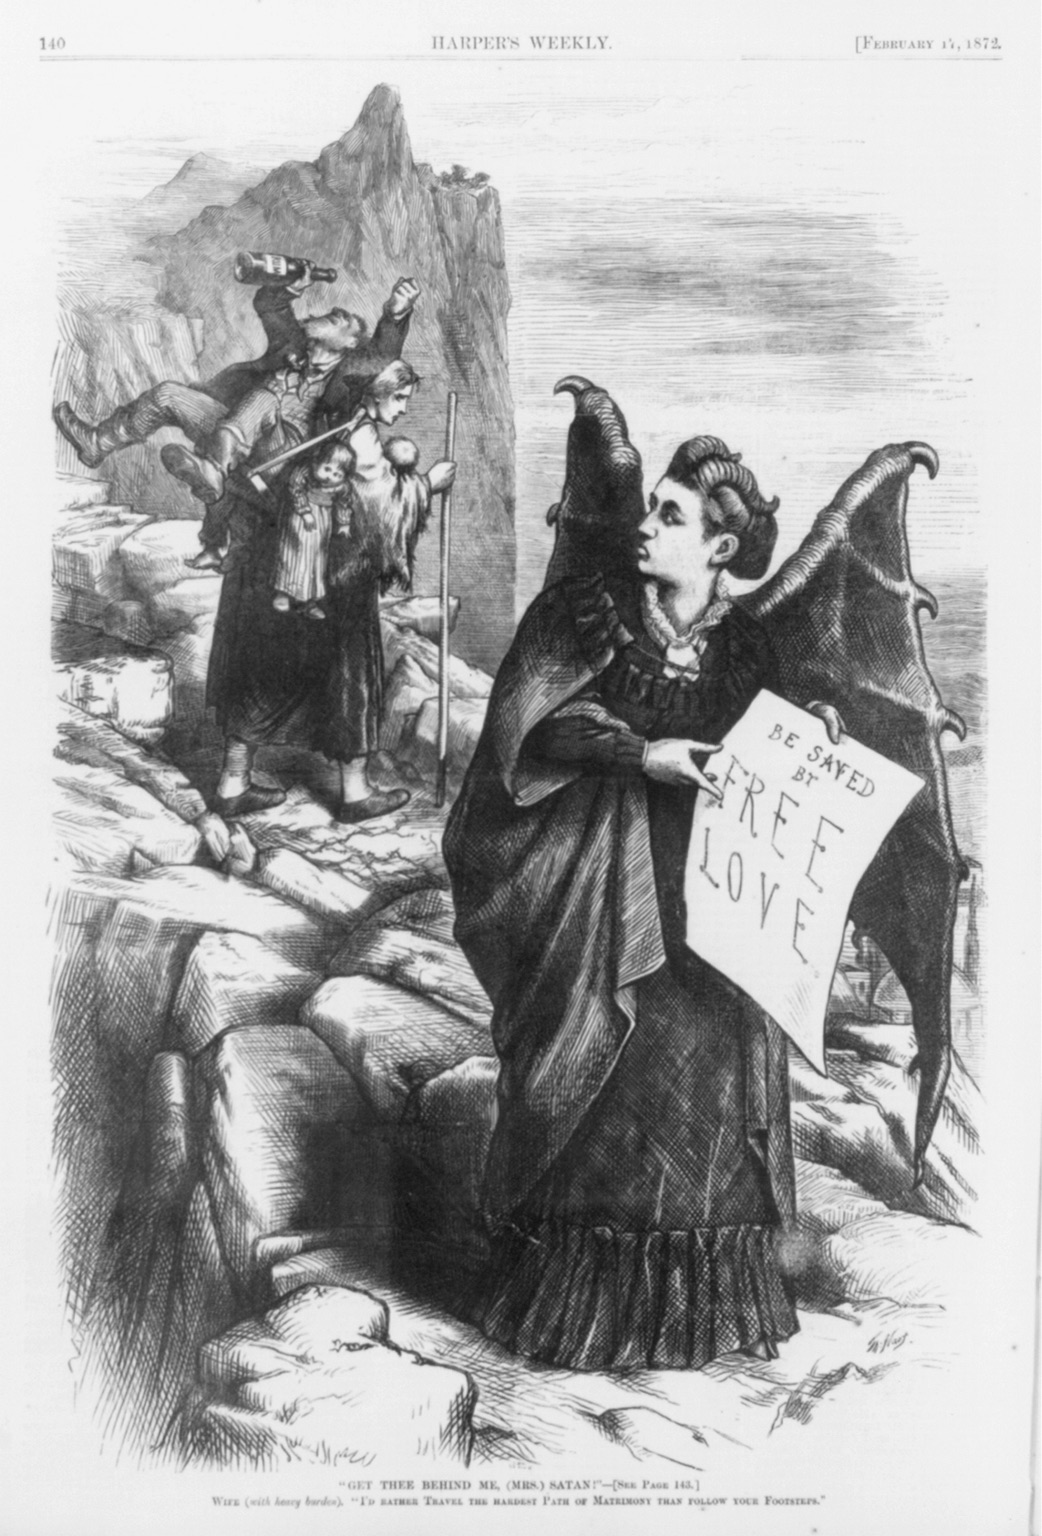  Victorian America found the idea of sex outside the bounds of marriage VERY threatening, and women speaking out about it in public? Yikes. This Harper’s Weekly sketch shows the clear Evil Danger of Free Love for women: doesn’t that lady with a drunk